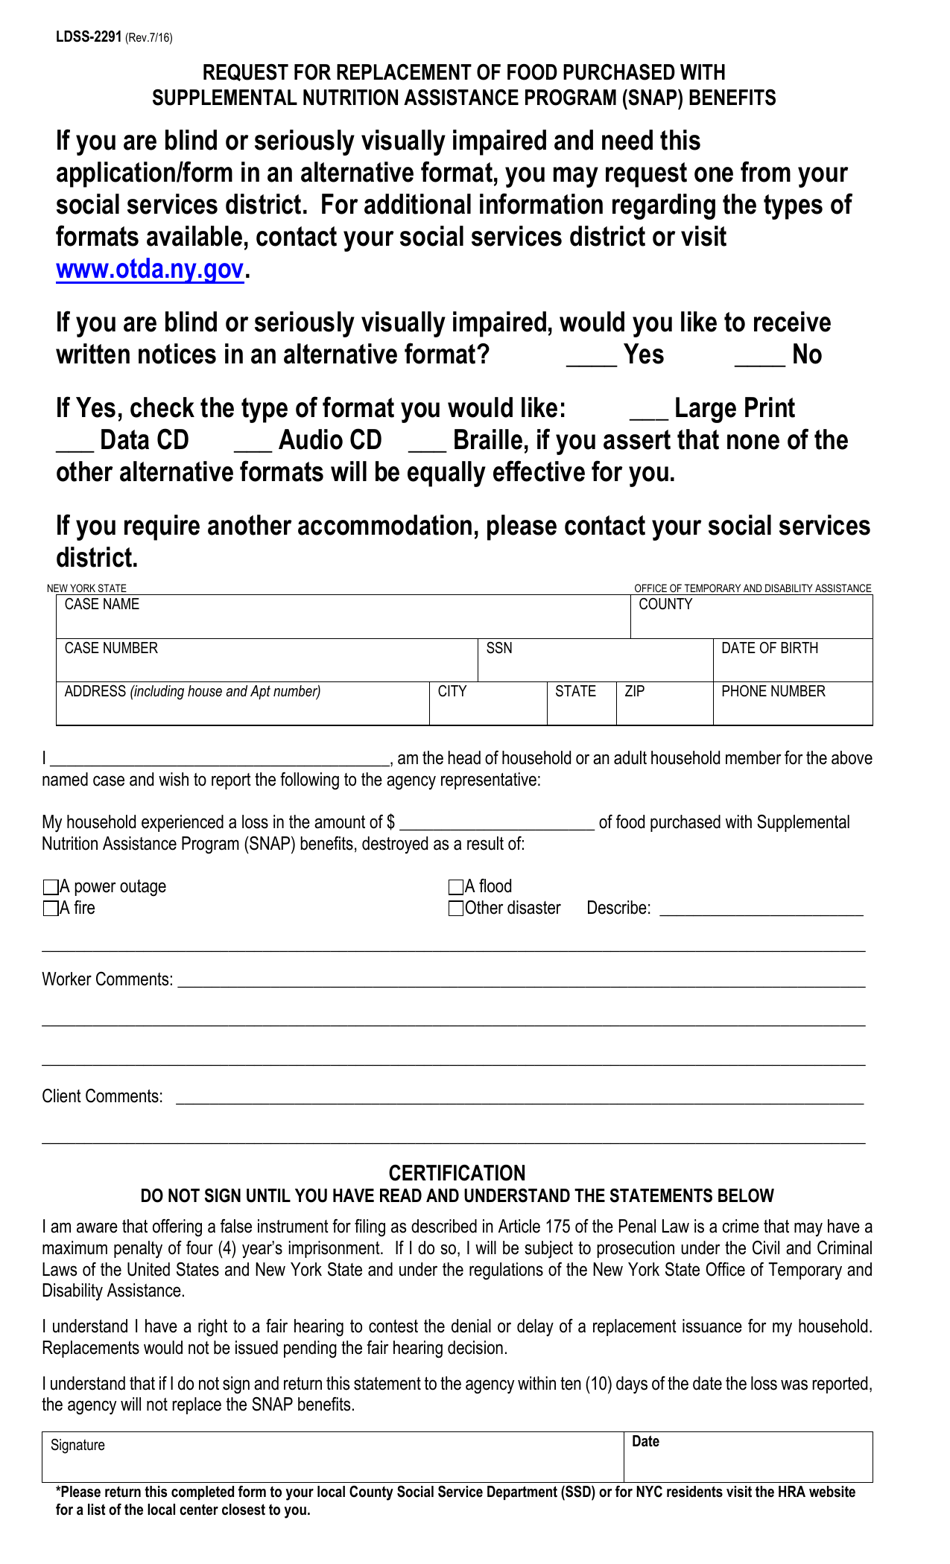 Form LDSS-2291 Request for Replacement of Food Purchased With Supplemental Nutrition Assistance Program (Snap) Benefits - New York (English / Polish), Page 1